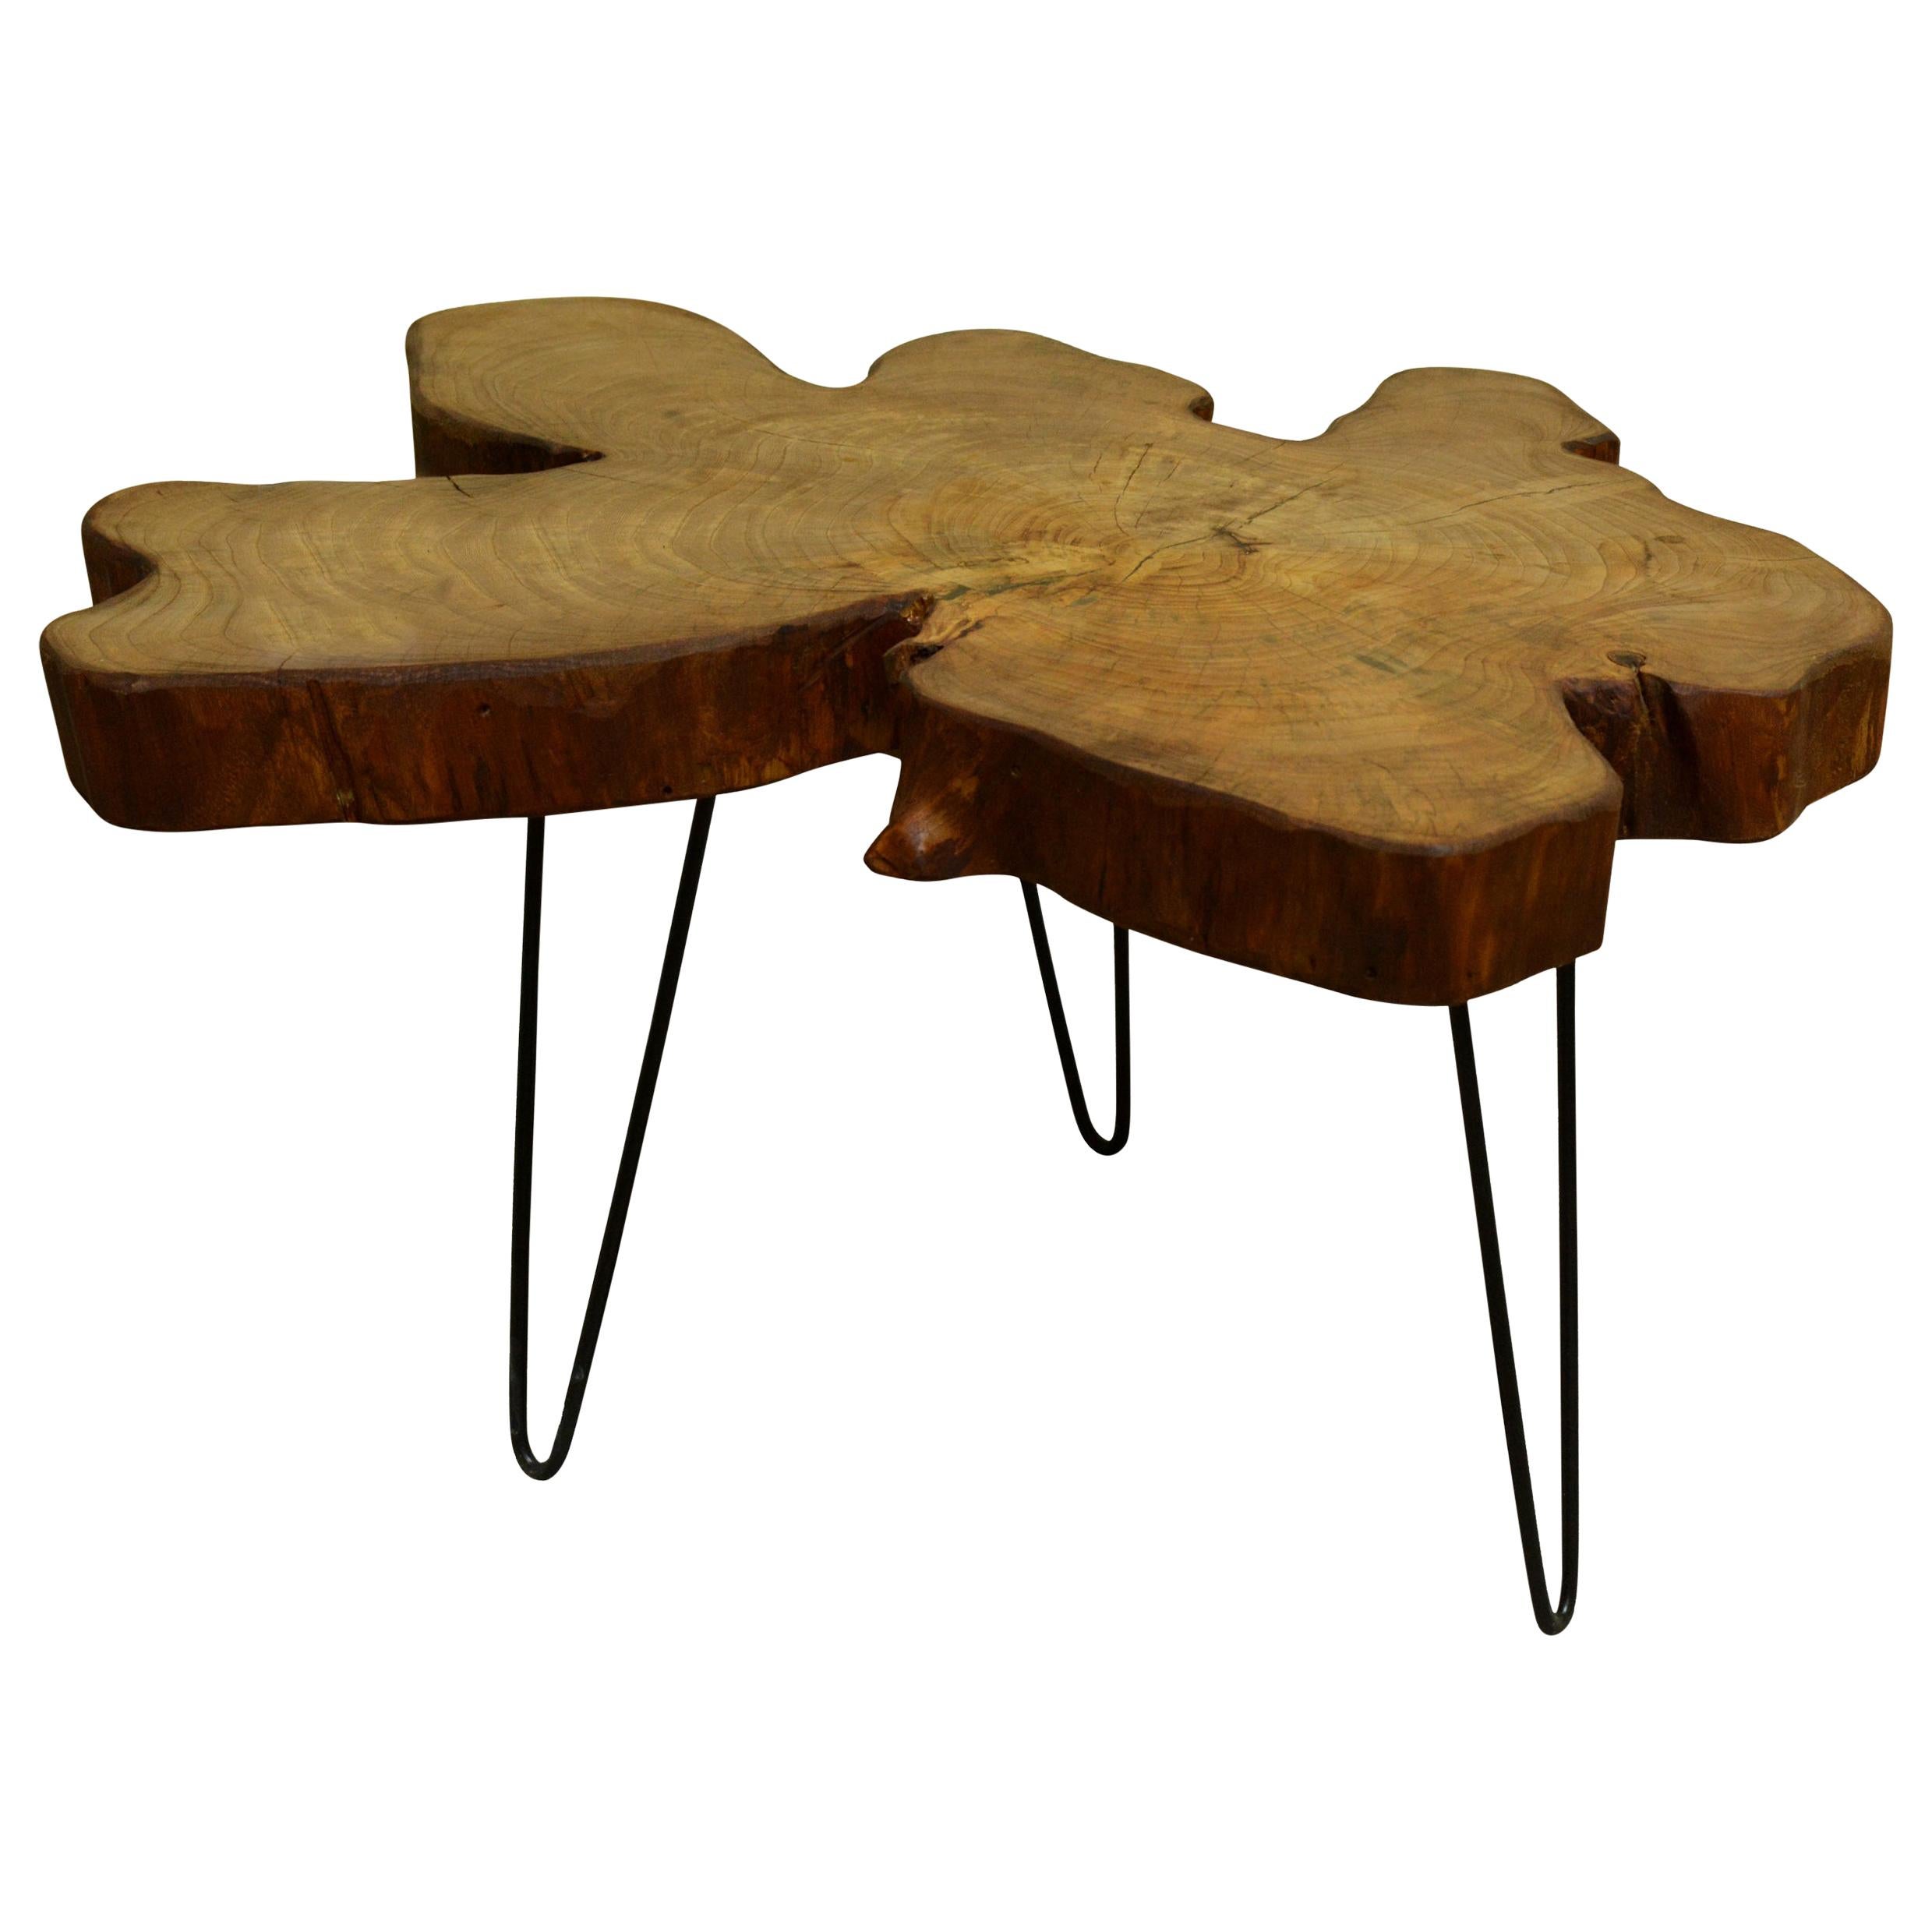 Redwood Tree Live Edge Coffee Table with Hairpin Legs / LECT152 For Sale